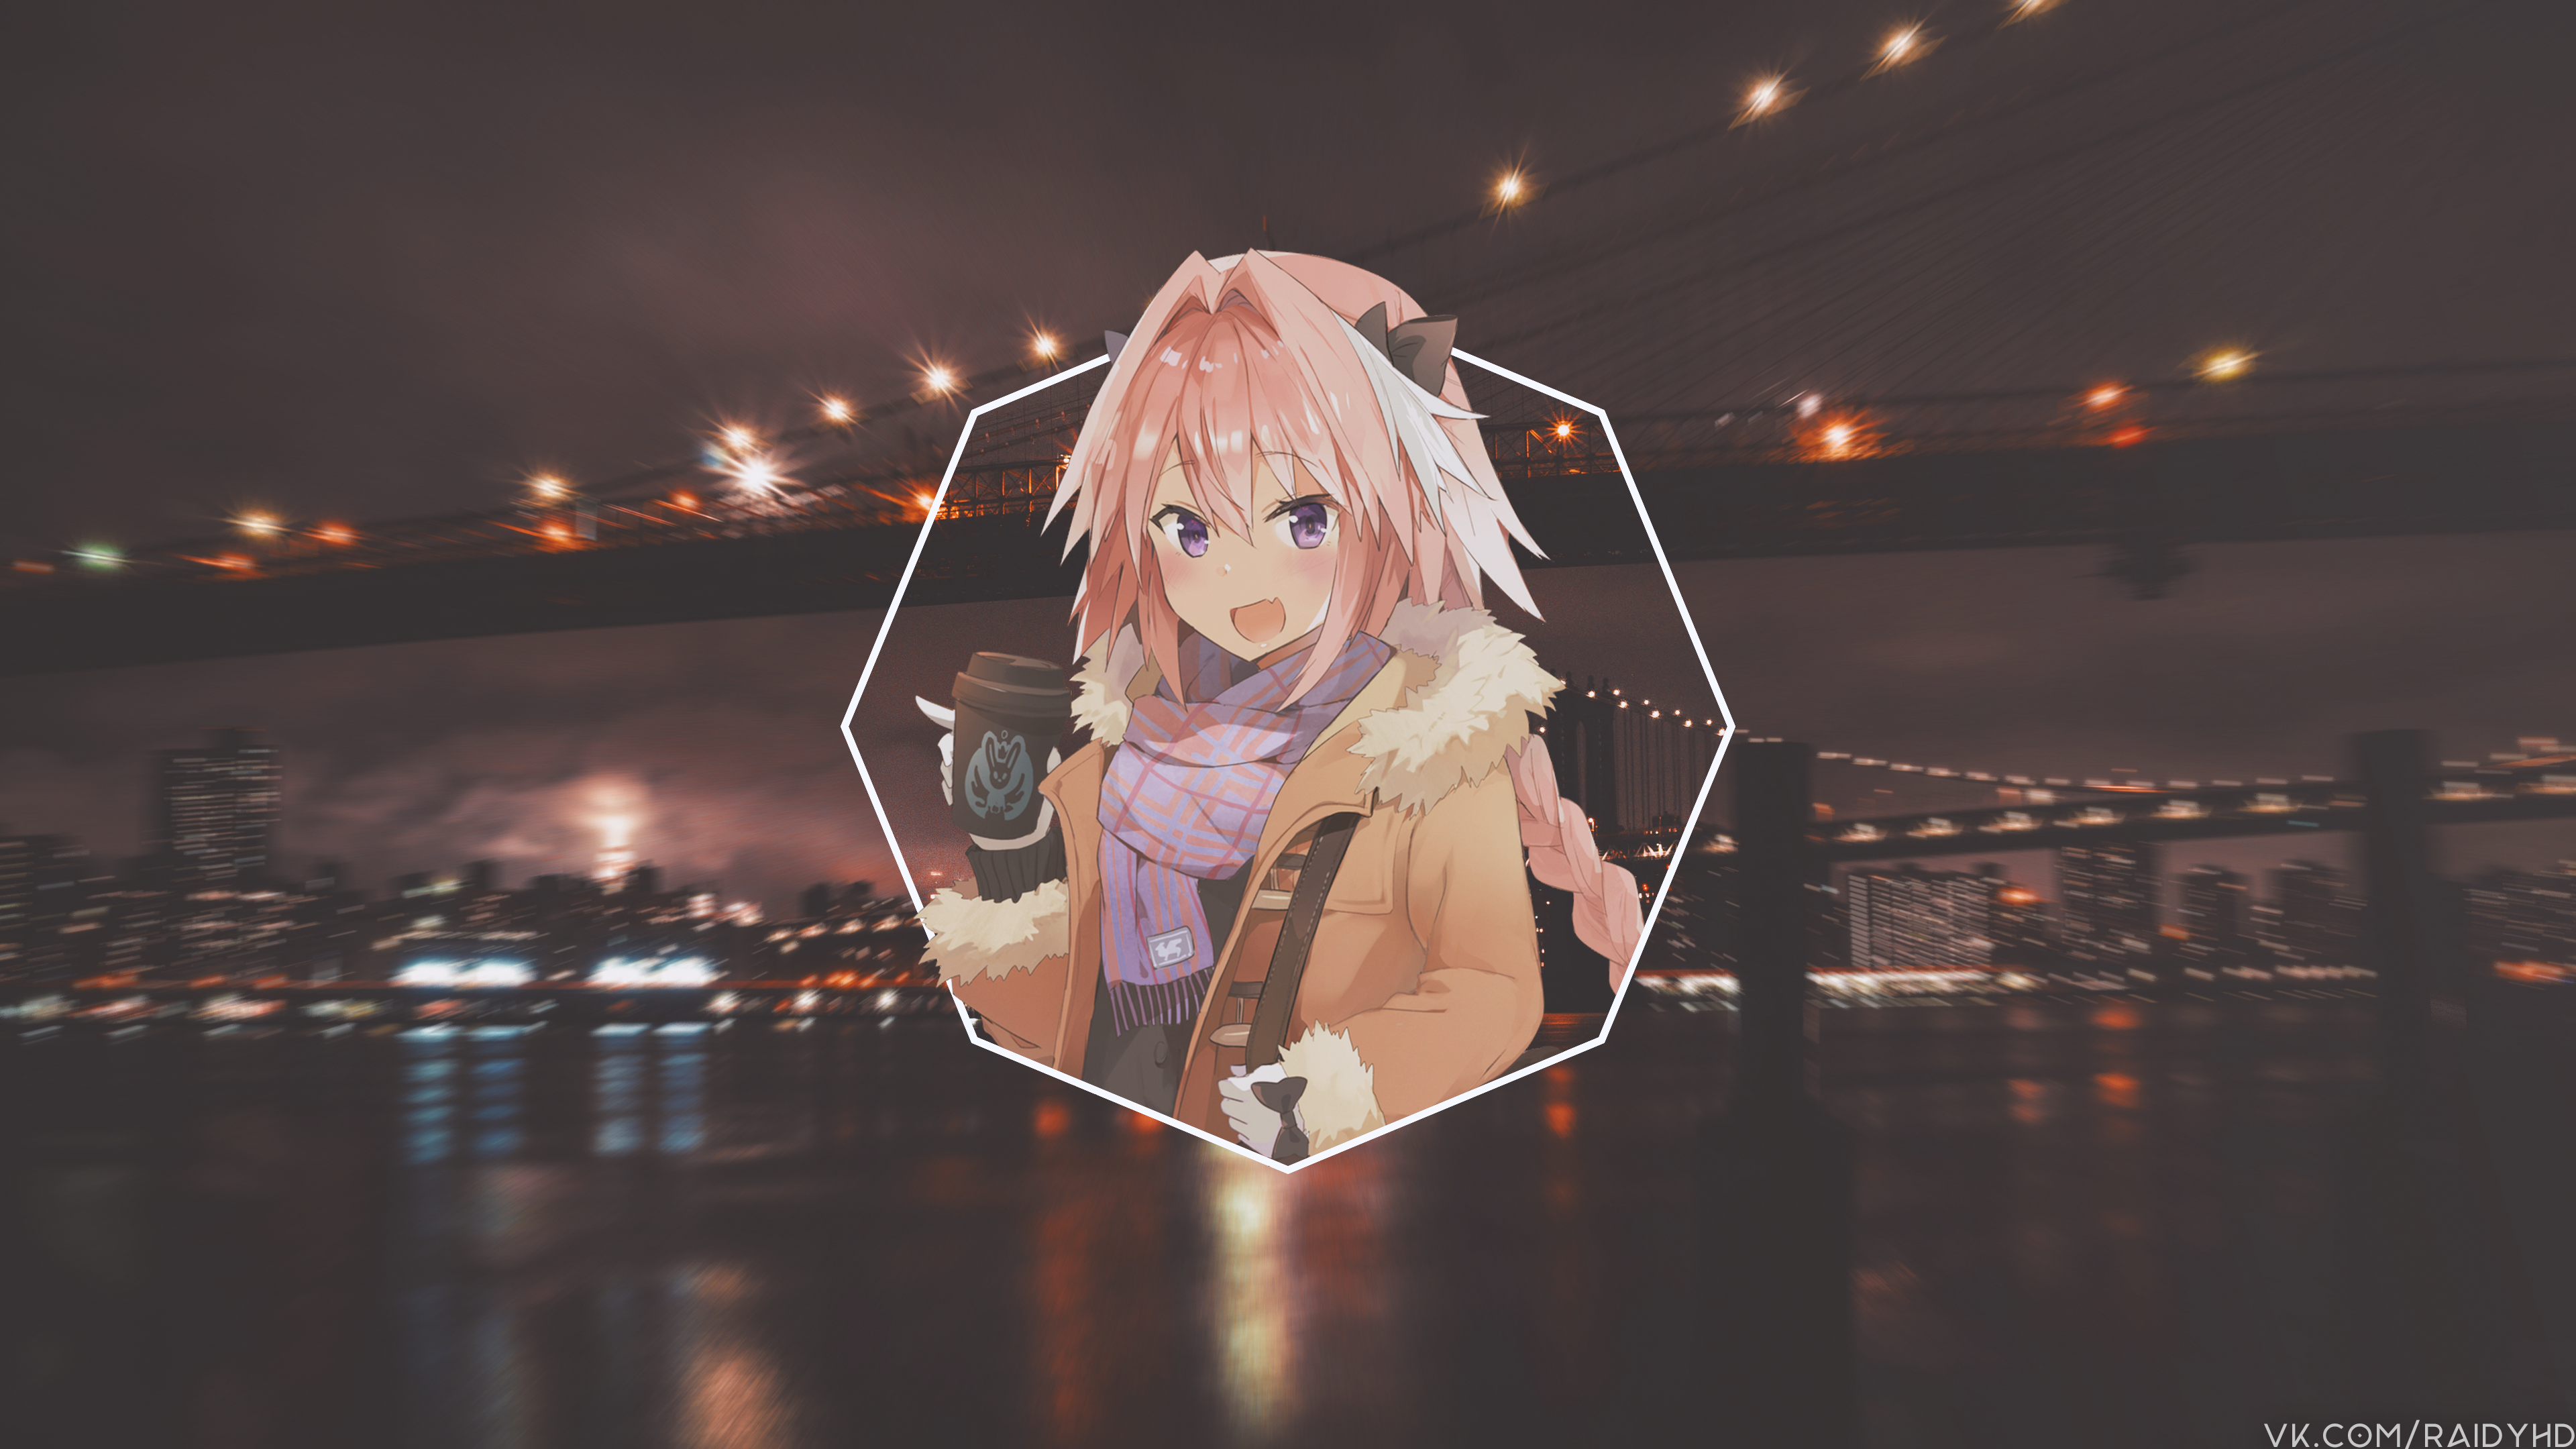 Anime 3840x2160 anime picture-in-picture Astolfo (Fate/Apocrypha) Fate series femboy anime boys